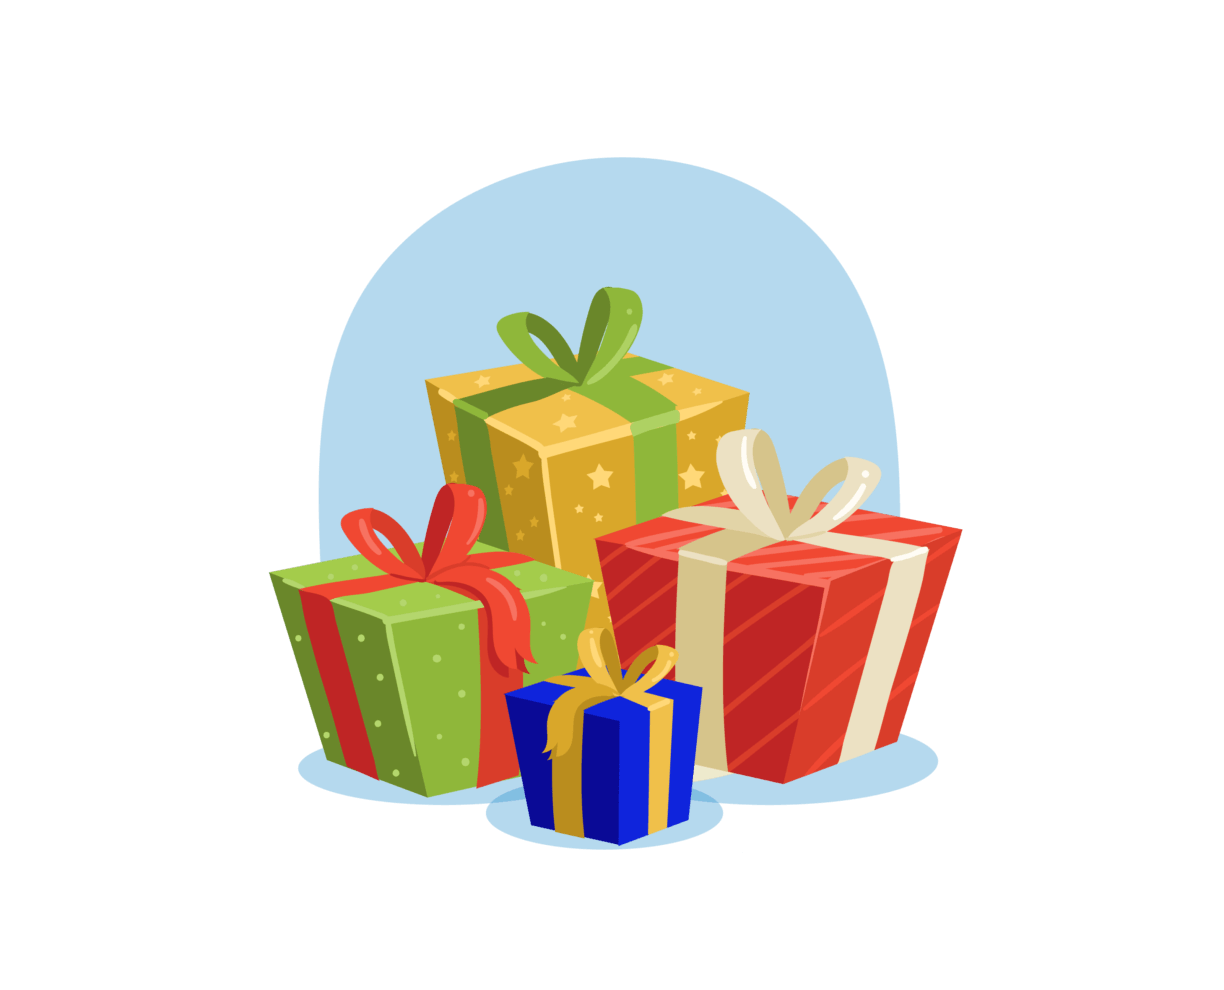 Illustration of wrapped gifts